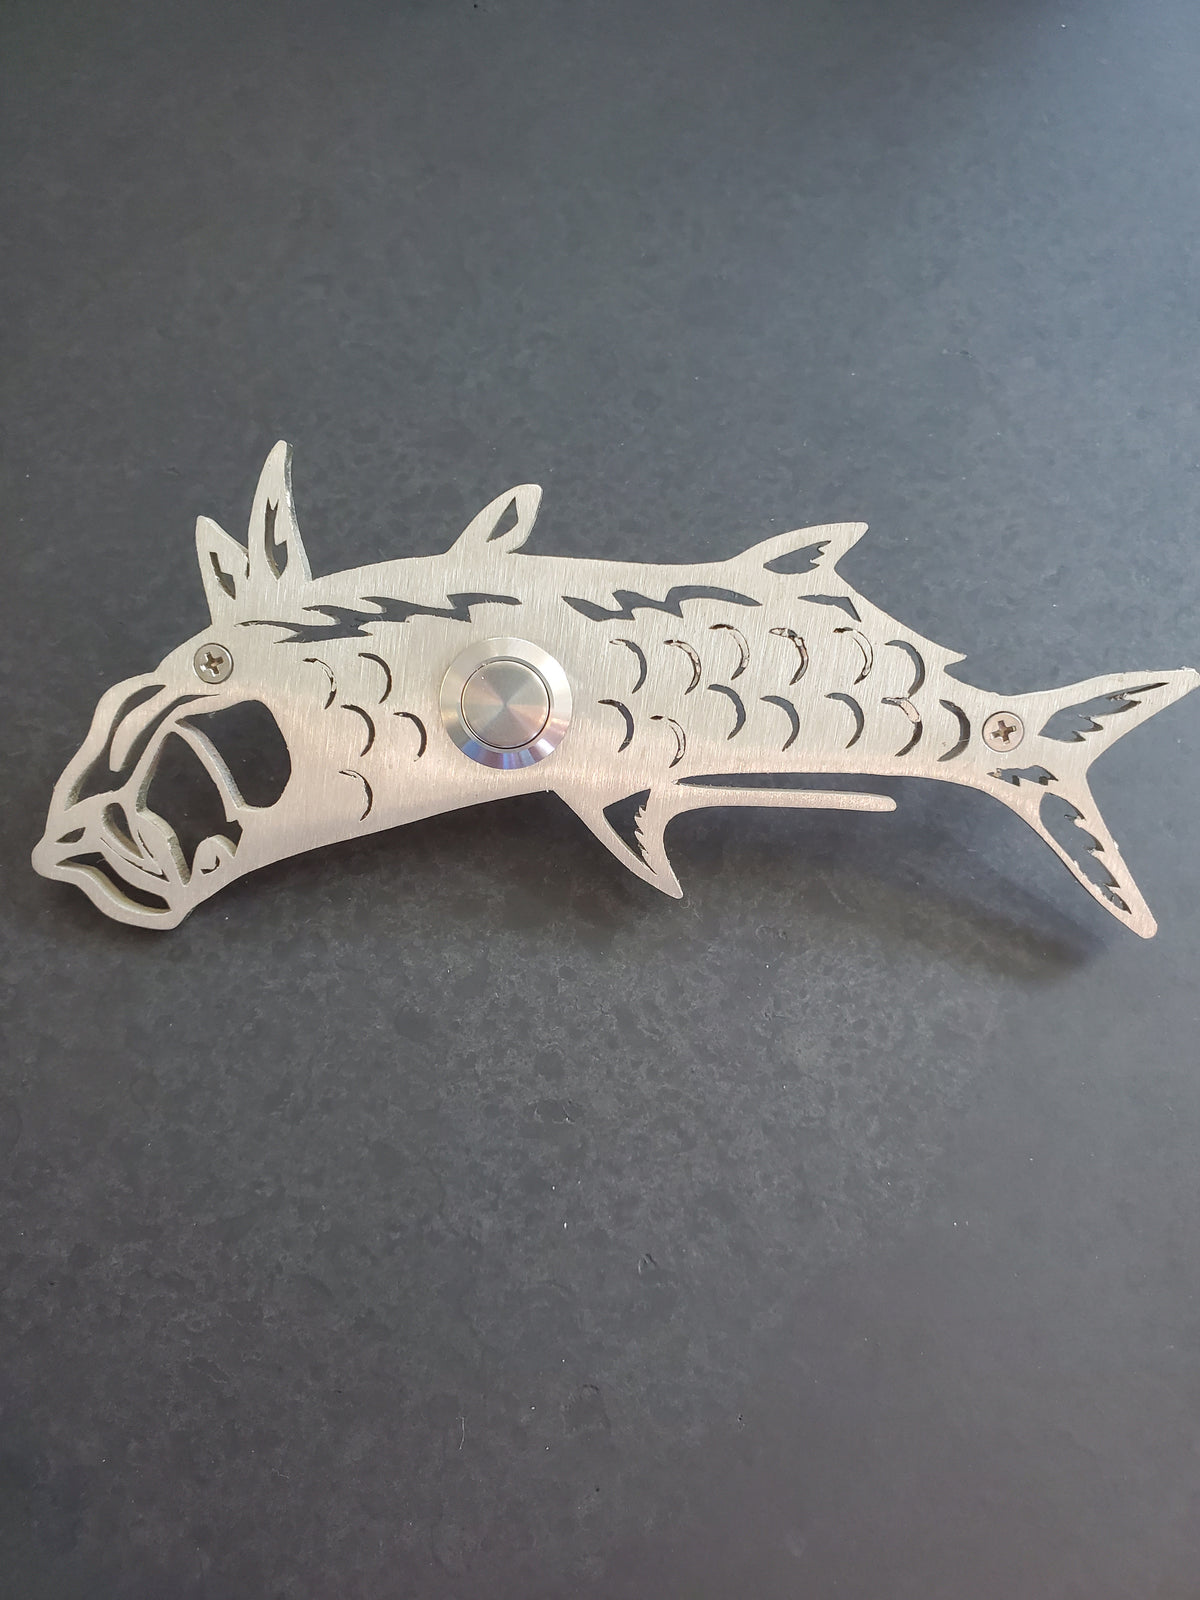 Stainless Steel Koi Fish Doorbell Expressions LTD